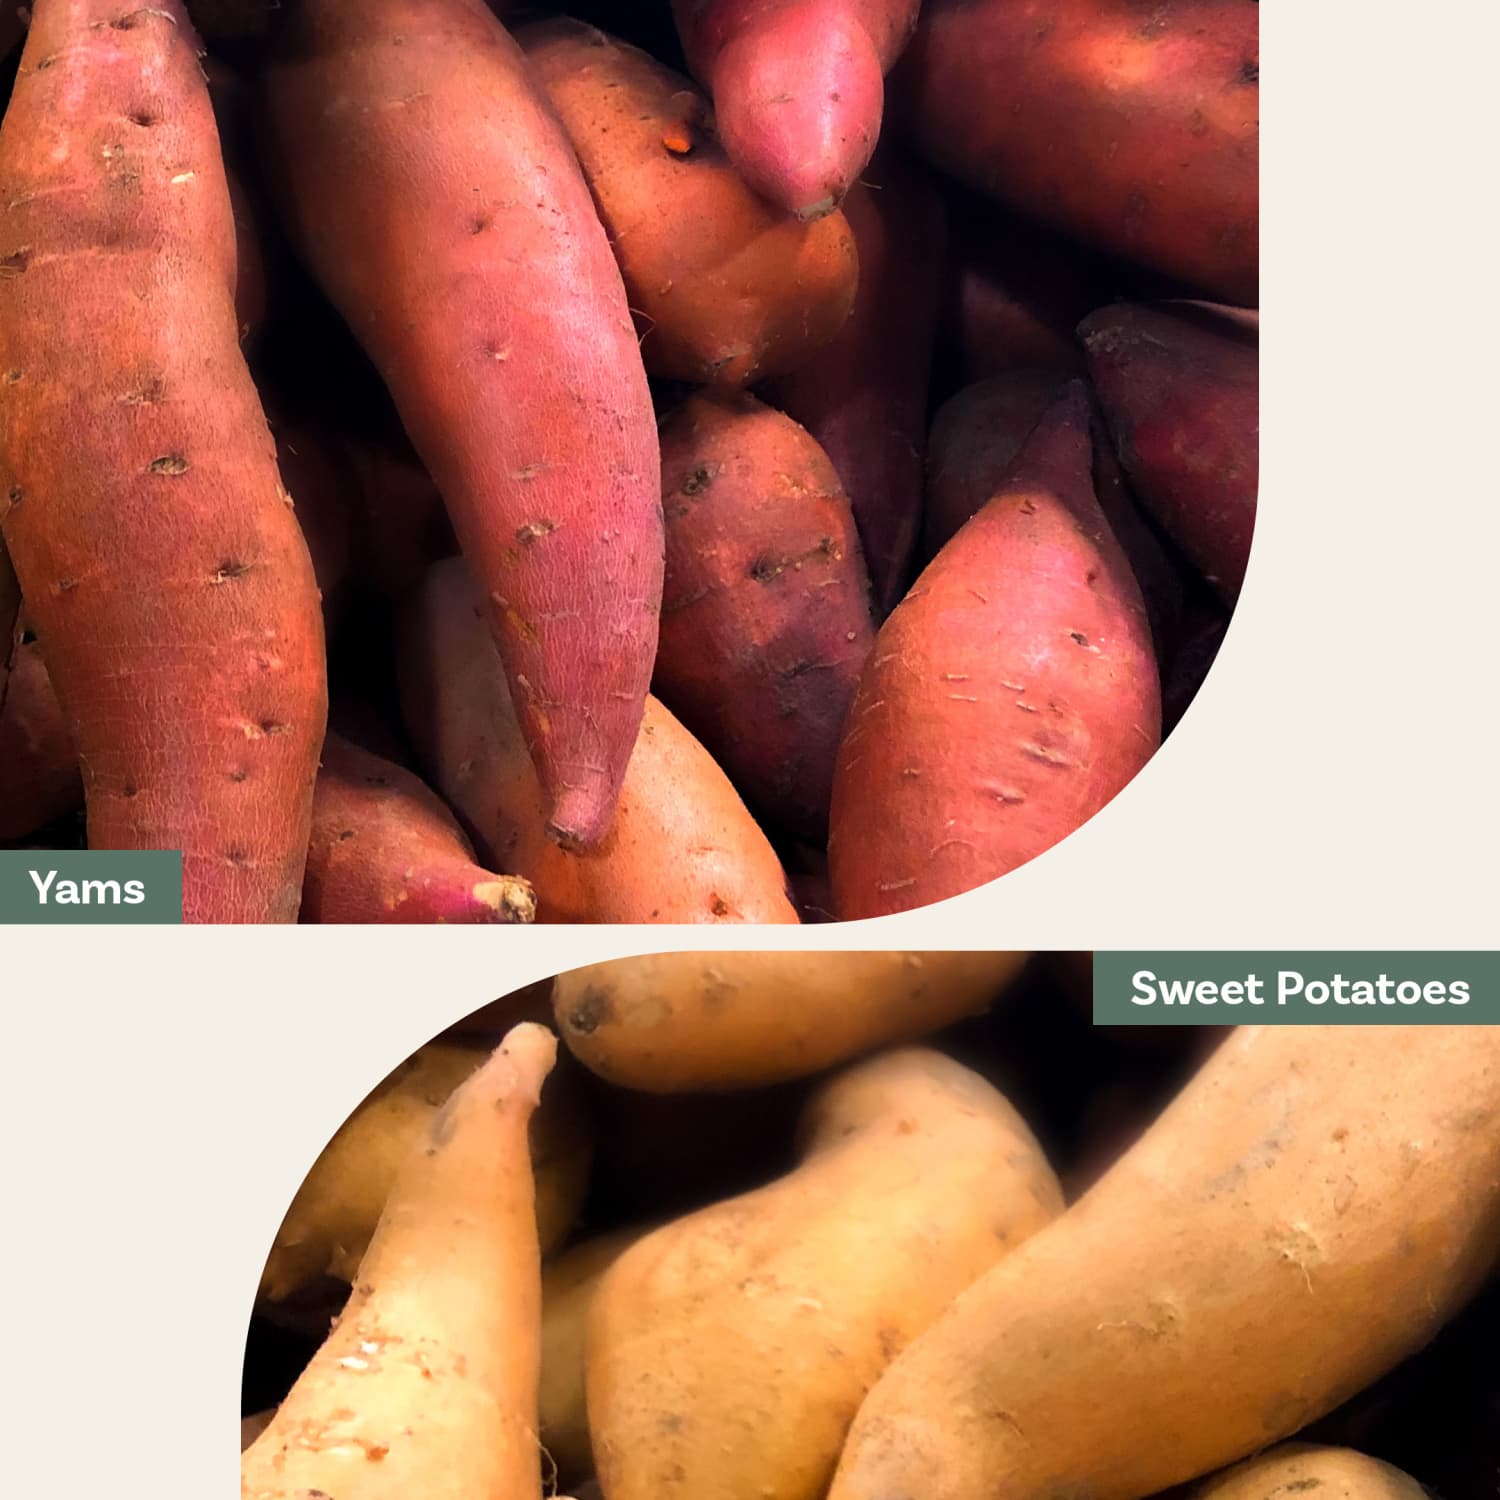 Garden Docs: These are the differences between yams and sweet potatoes